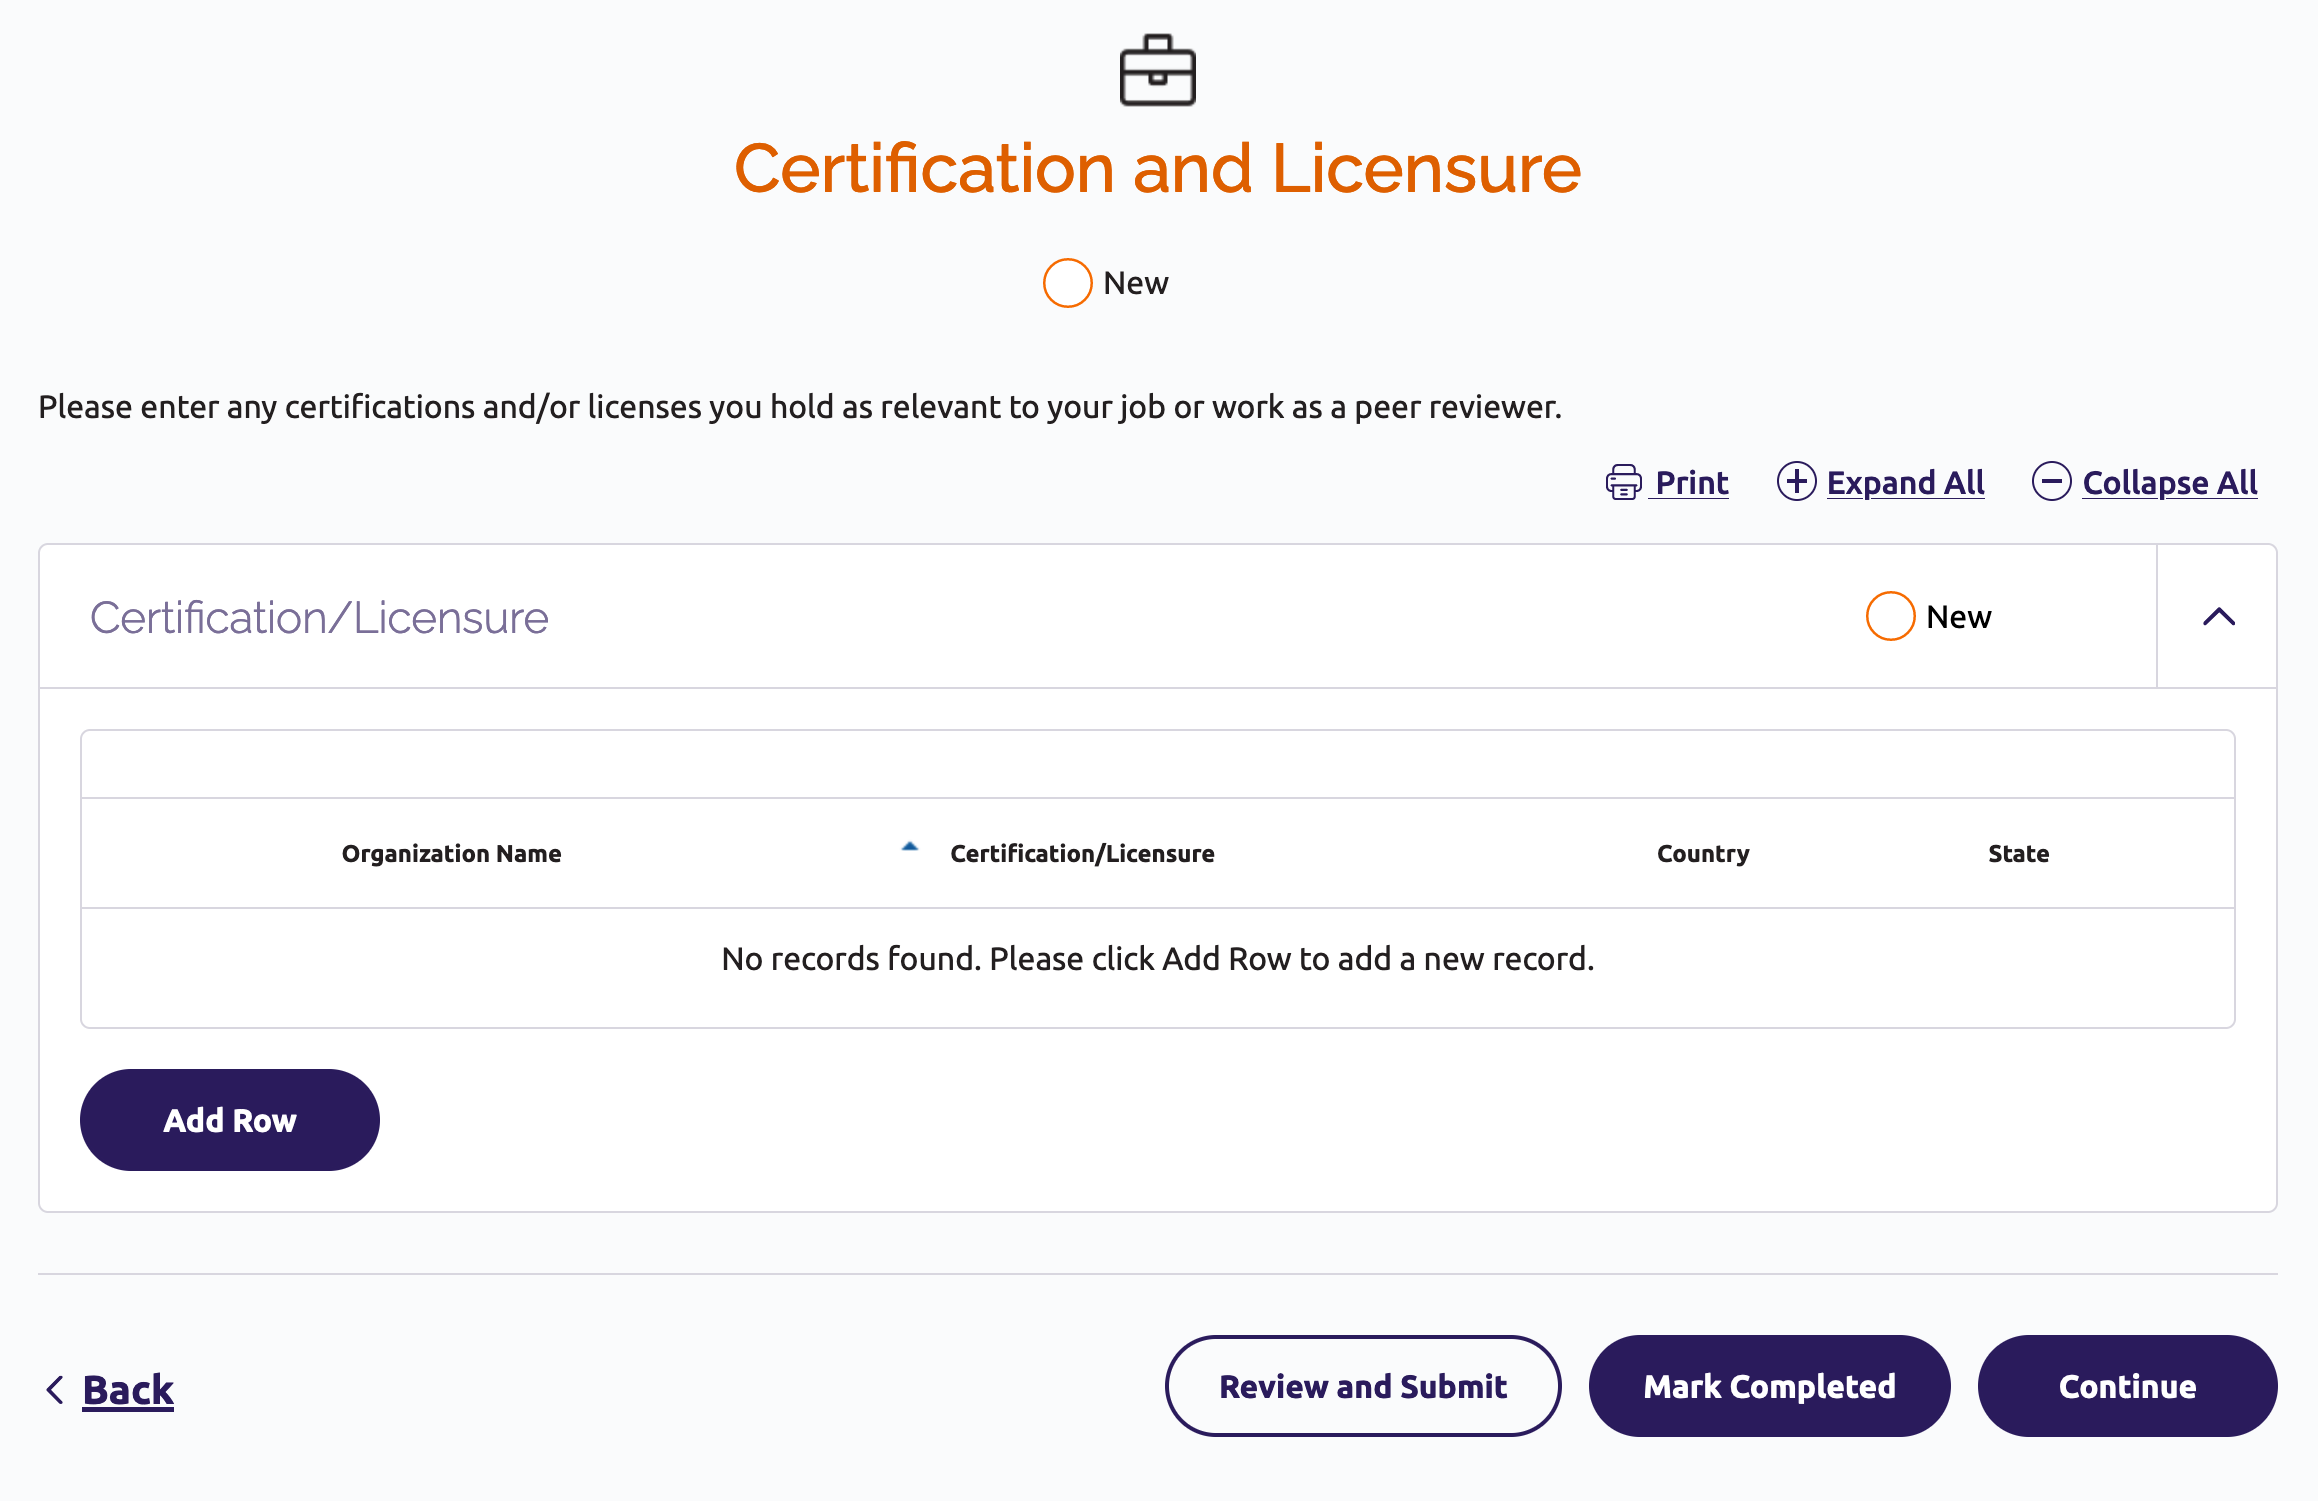 Certification and Licensure section page